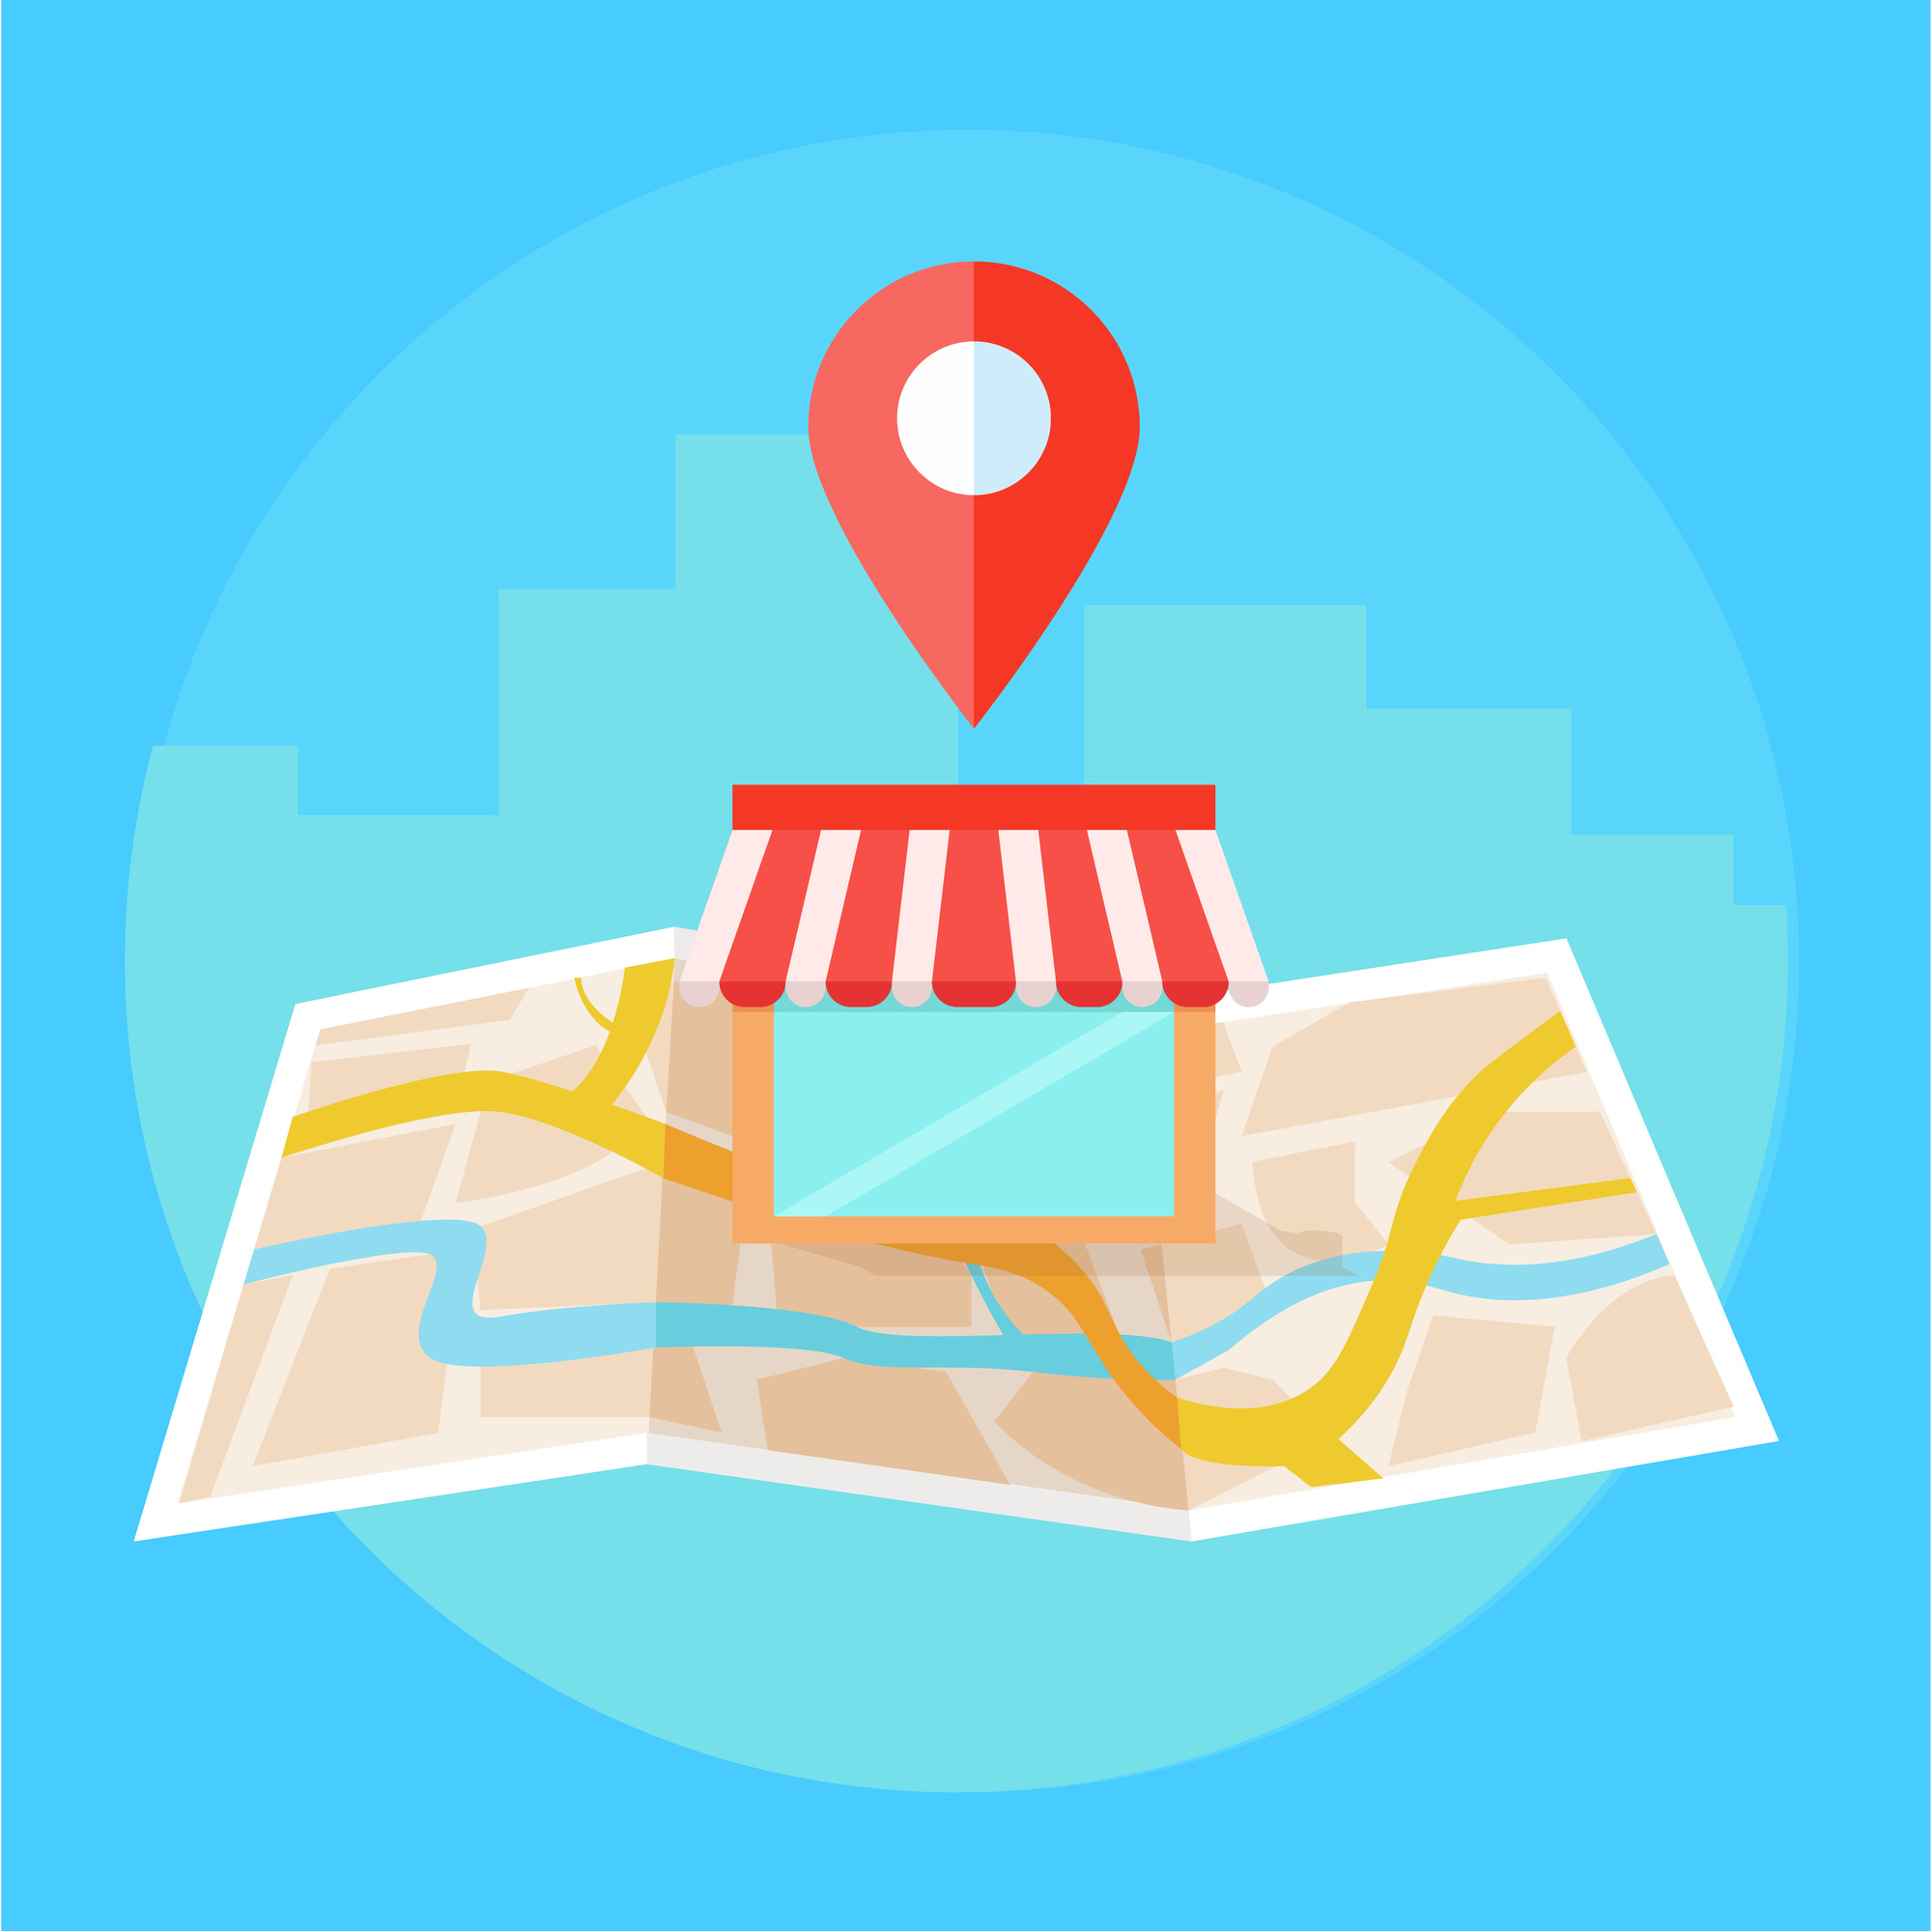 Affordable Local Seo Services